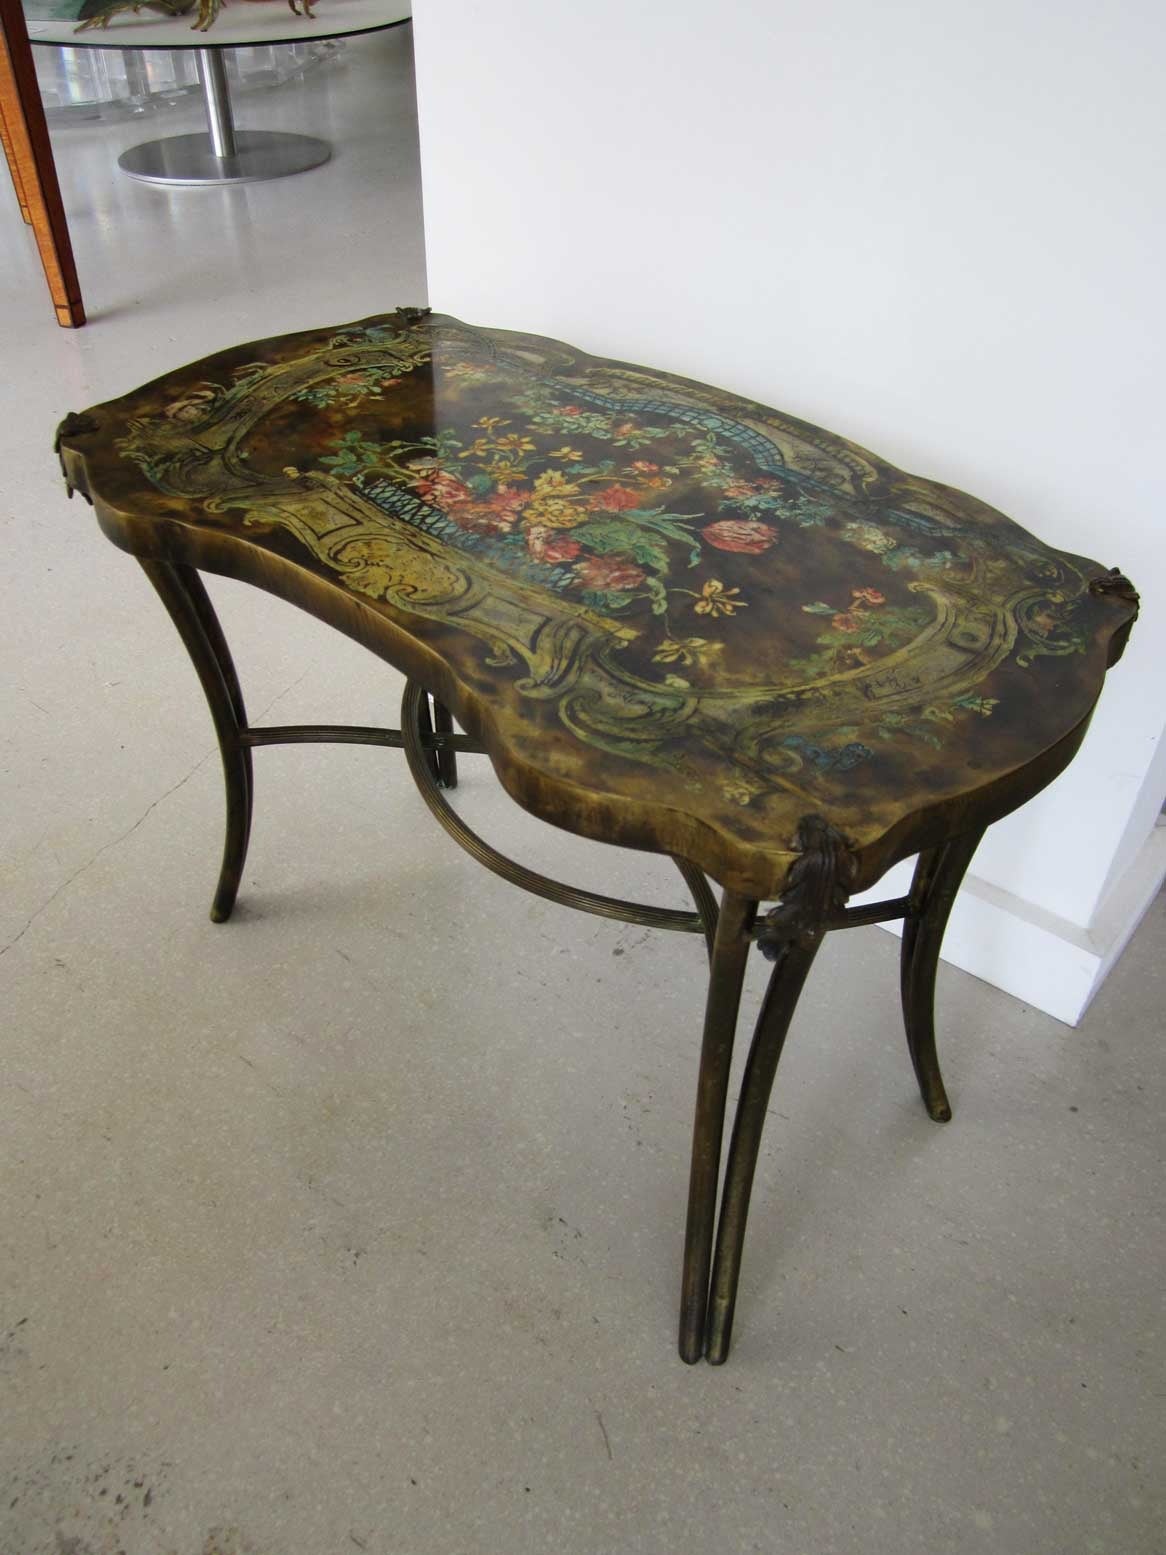 Small single Laverne table featuring a colorful and detailed top in the style of 